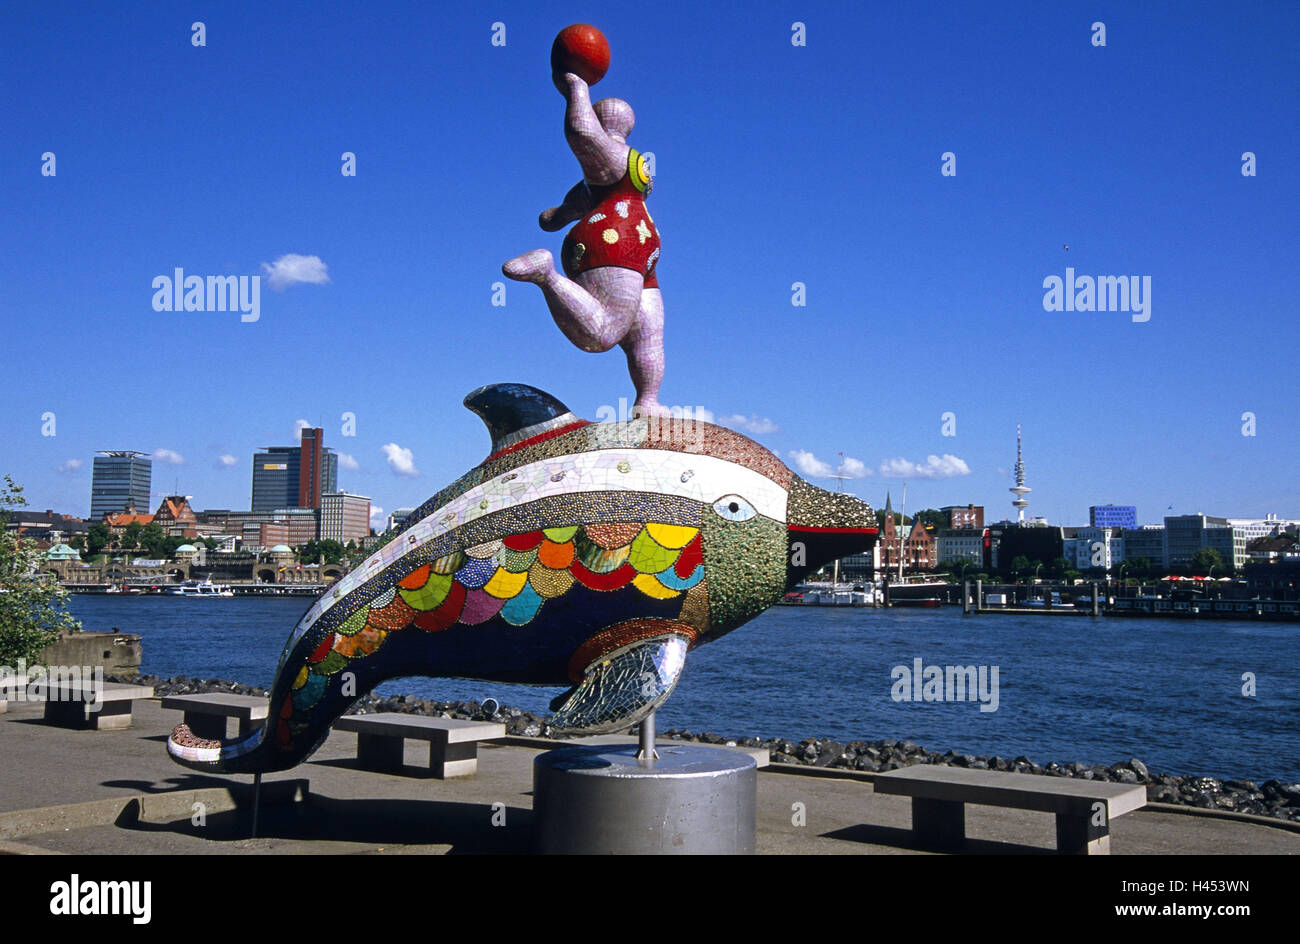 Germany, Hamburg-Steinwerder, the Elbe, harbour, dolphin's figure, Hamburg, part town, Steinwerder, Elbufer, stone benches, concrete benches, saddles, culture, art, St. art, women's figure, dolphin, figure, sculpture, 'Nana', Nana sculpture, plastic, brightly, mosaic, ball, tourism, place of interest, St. art, Elbpanorama, town view, sunshine, shade, Stock Photo